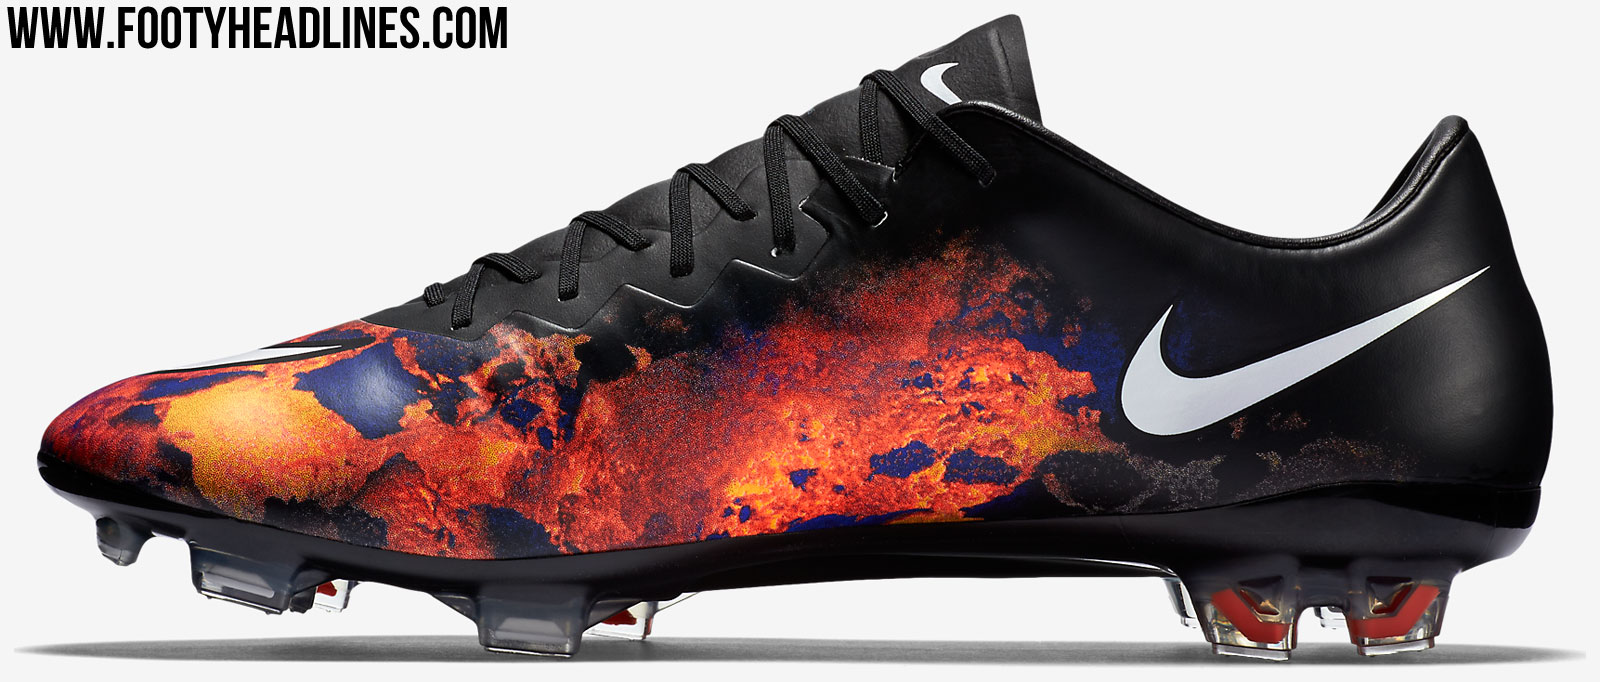 tapperhed Konsulat tidligste Nike Mercurial Vapor X Cristiano Ronaldo Savage Beauty 2015-2016 Boots  Released - Footy Headlines